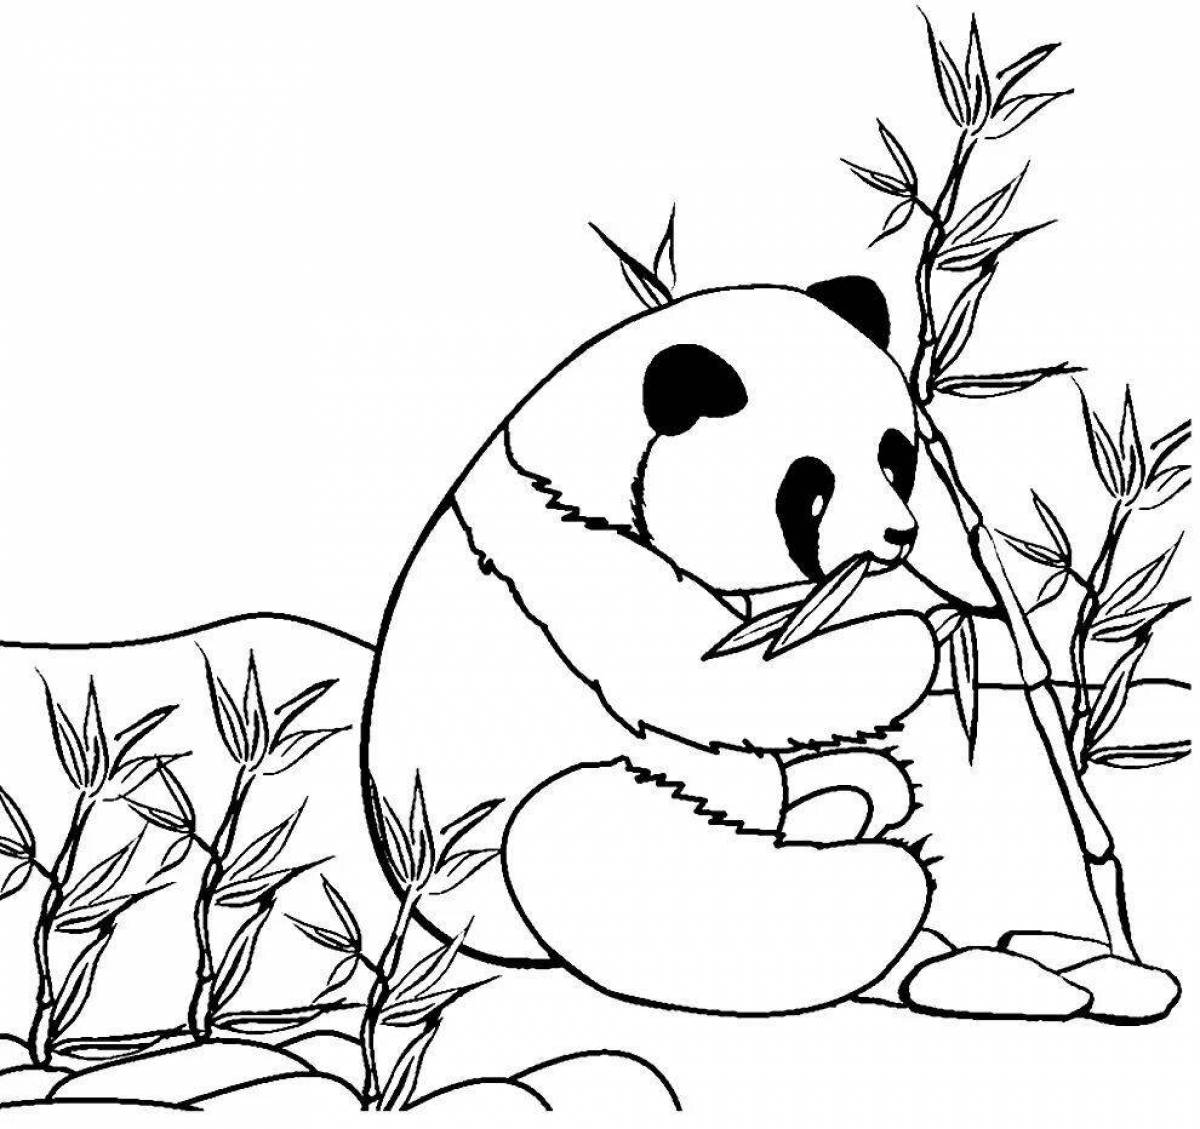 Colorful little panda coloring page